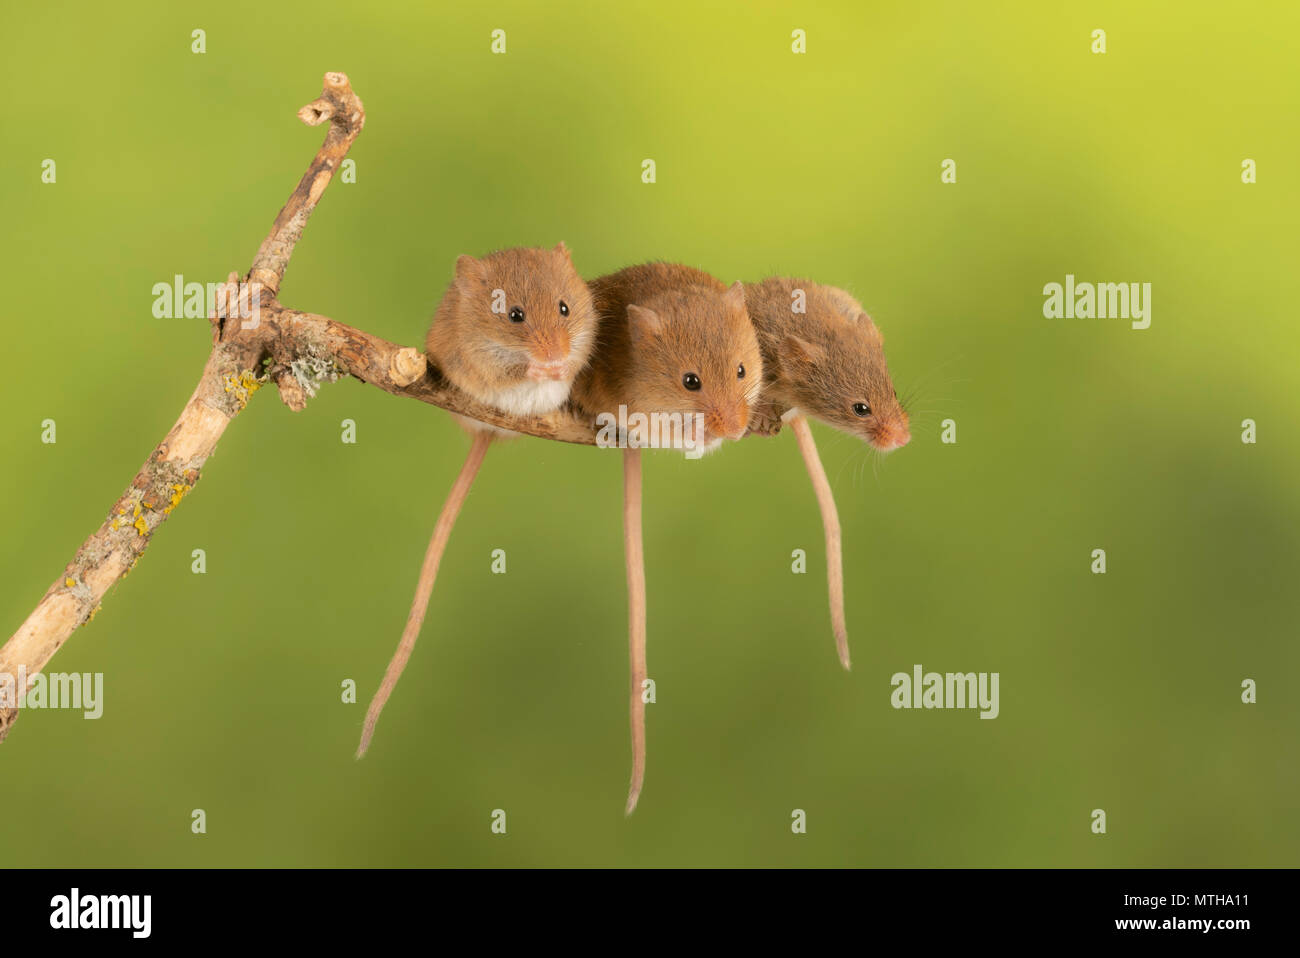 Trio of cure harvest mice sitting on a branch Stock Photo